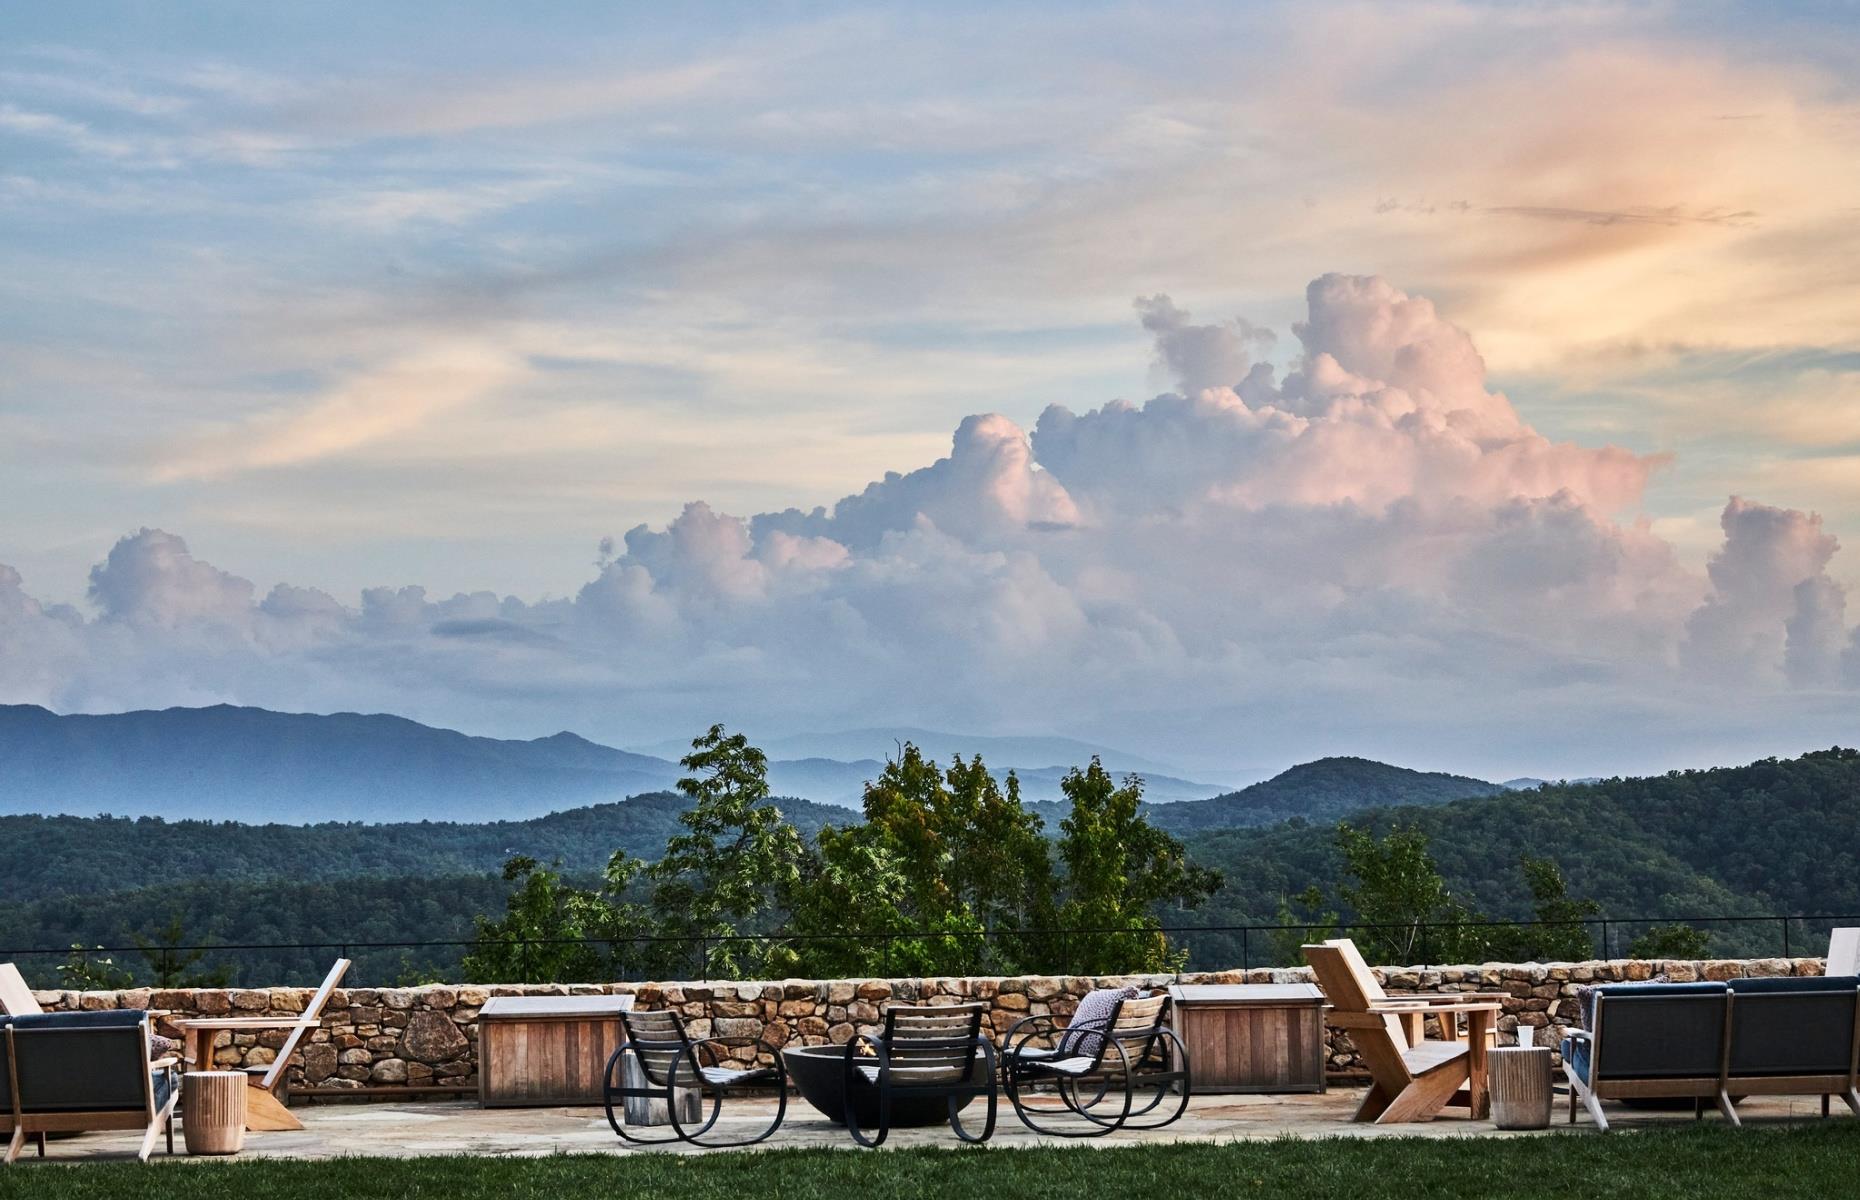 <p>Not all mountain resorts opt for a rustic vibe – the Great Smoky Mountains of Tennessee are home to <a href="https://www.blackberrymountain.com/">Blackberry Mountain</a>, which boasts a clean and crisp aesthetic to match its emphasis on wellness and peace of mind. For a more traditional “mountain vibe”, the resort’s sister property <a href="https://www.blackberryfarm.com/">Blackberry Farm</a> has a down-home (but still high-end) feel. Either way, both offer a serene mountain escape coupled with renowned culinary experiences and adventures in nature.</p>